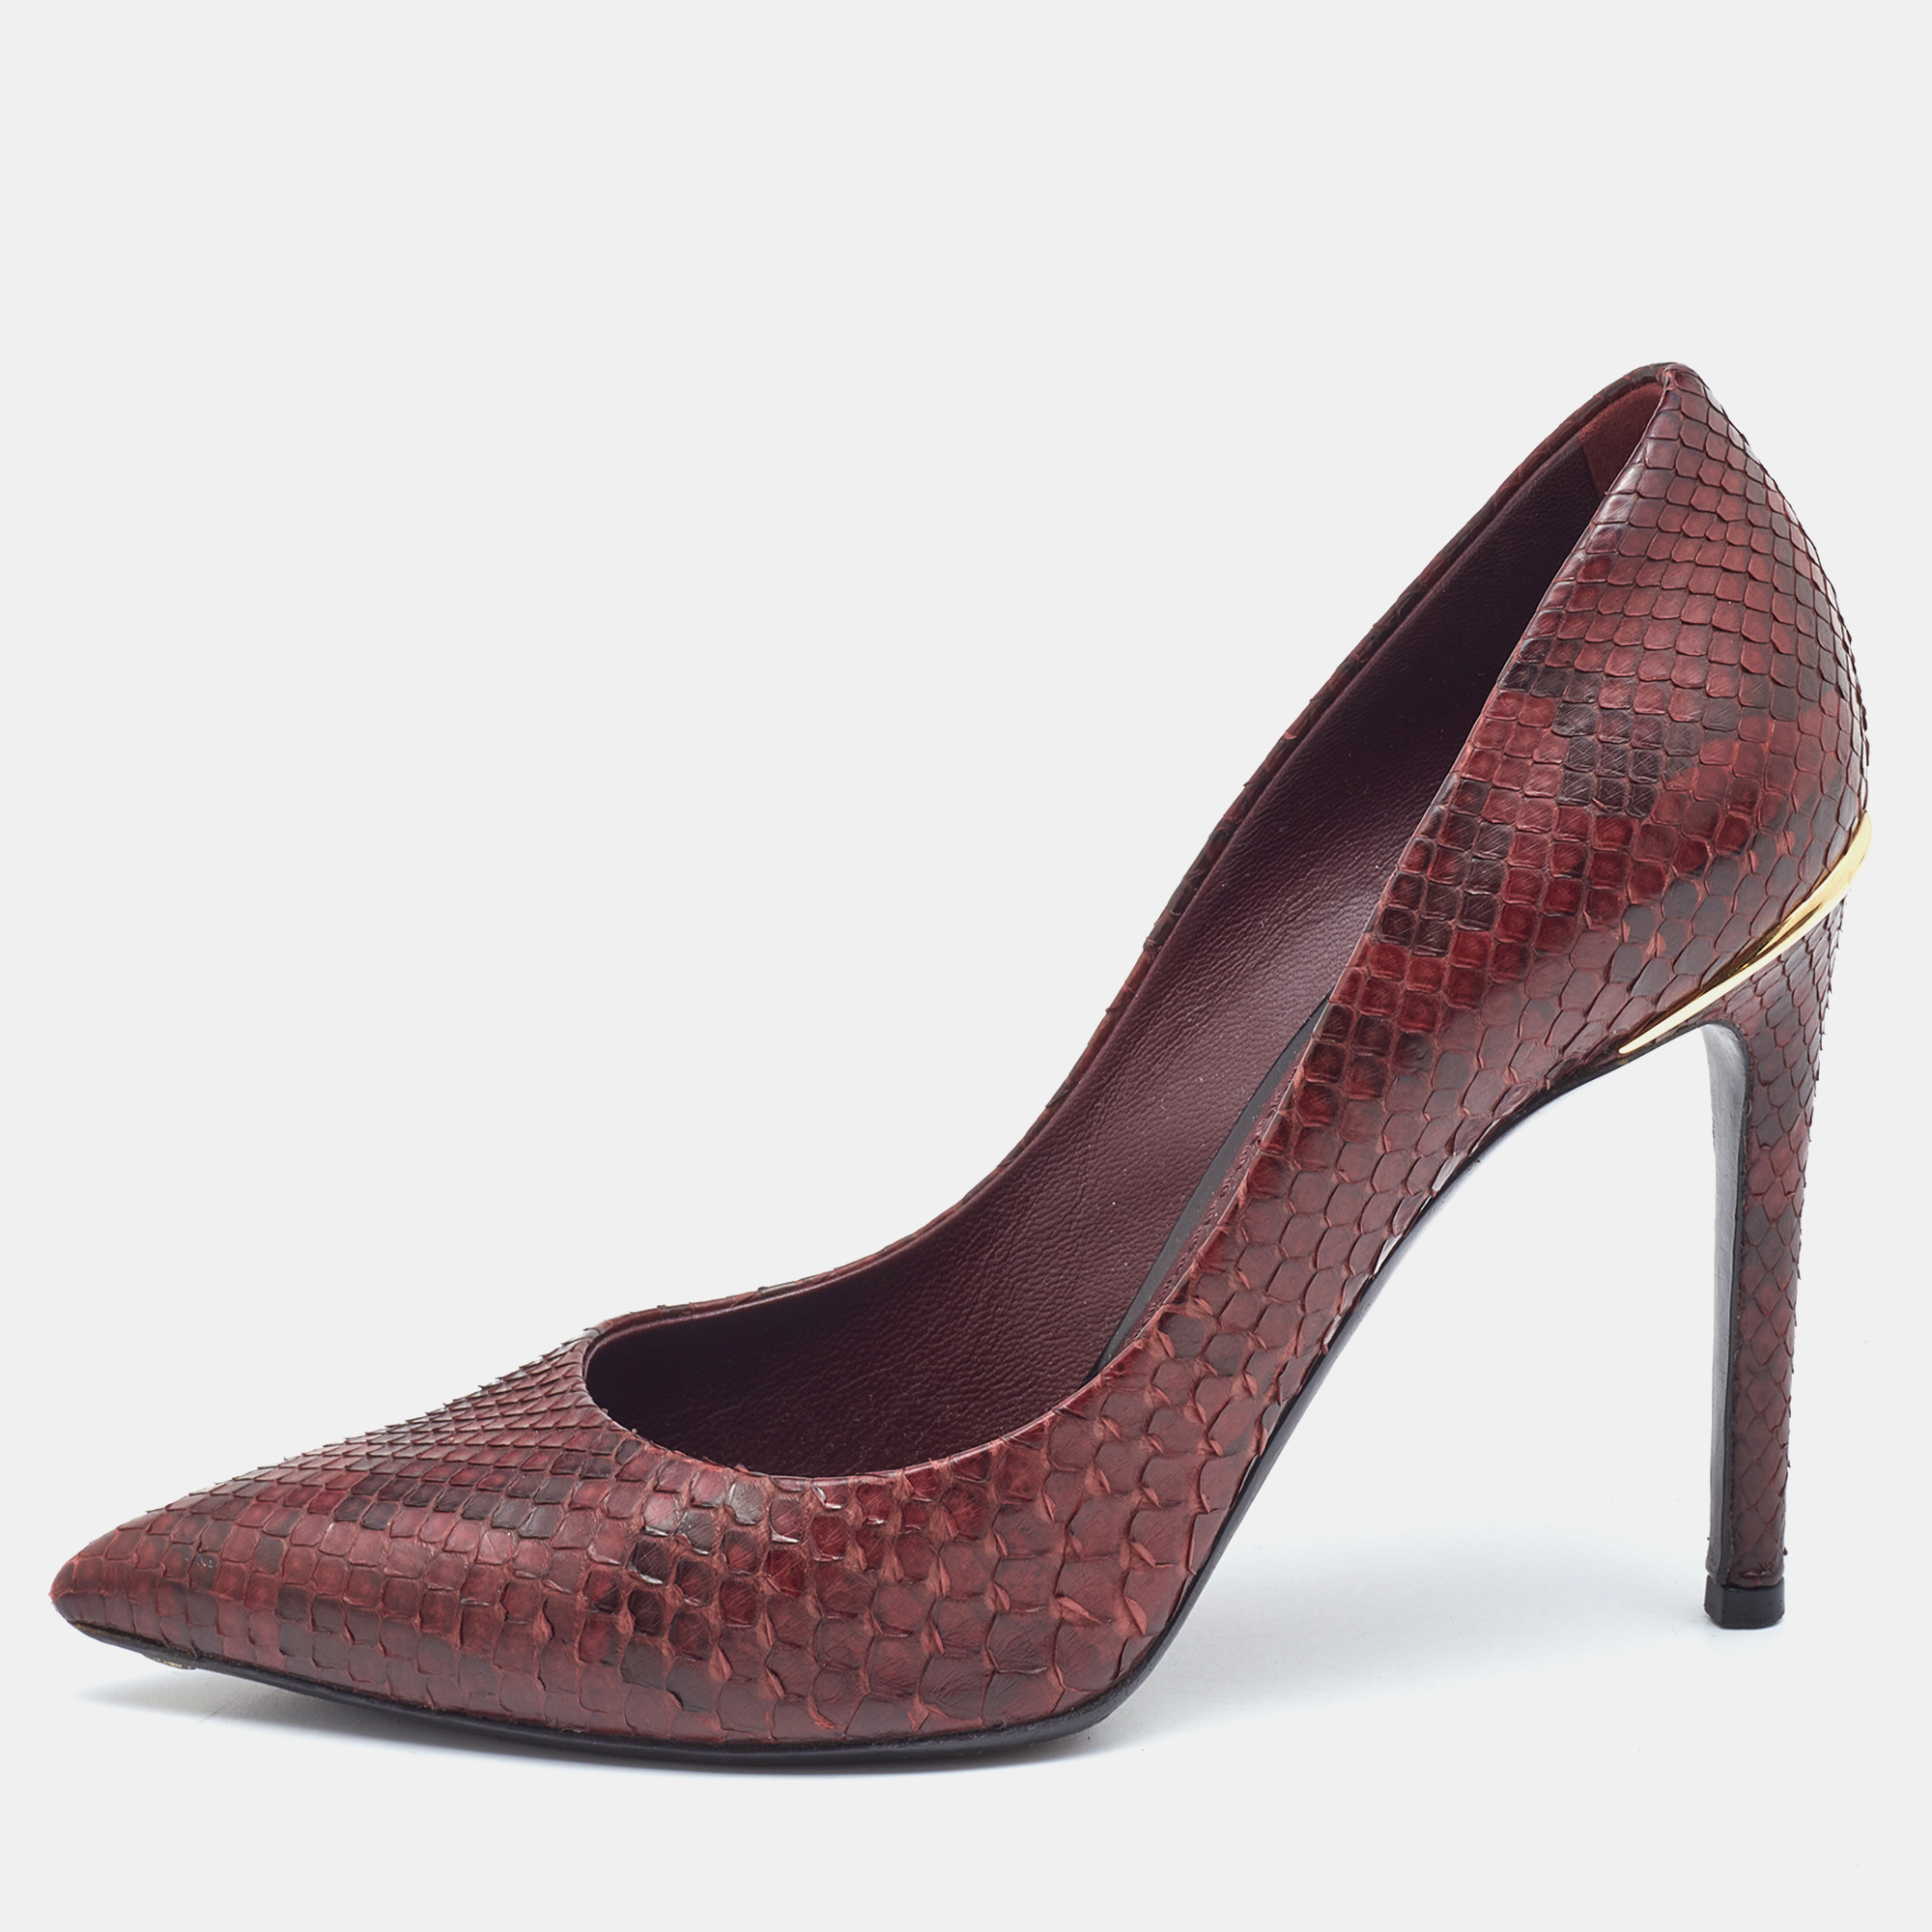 Pre-owned Louis Vuitton Burgundy Python Leather Slip On Pumps Size 34.5